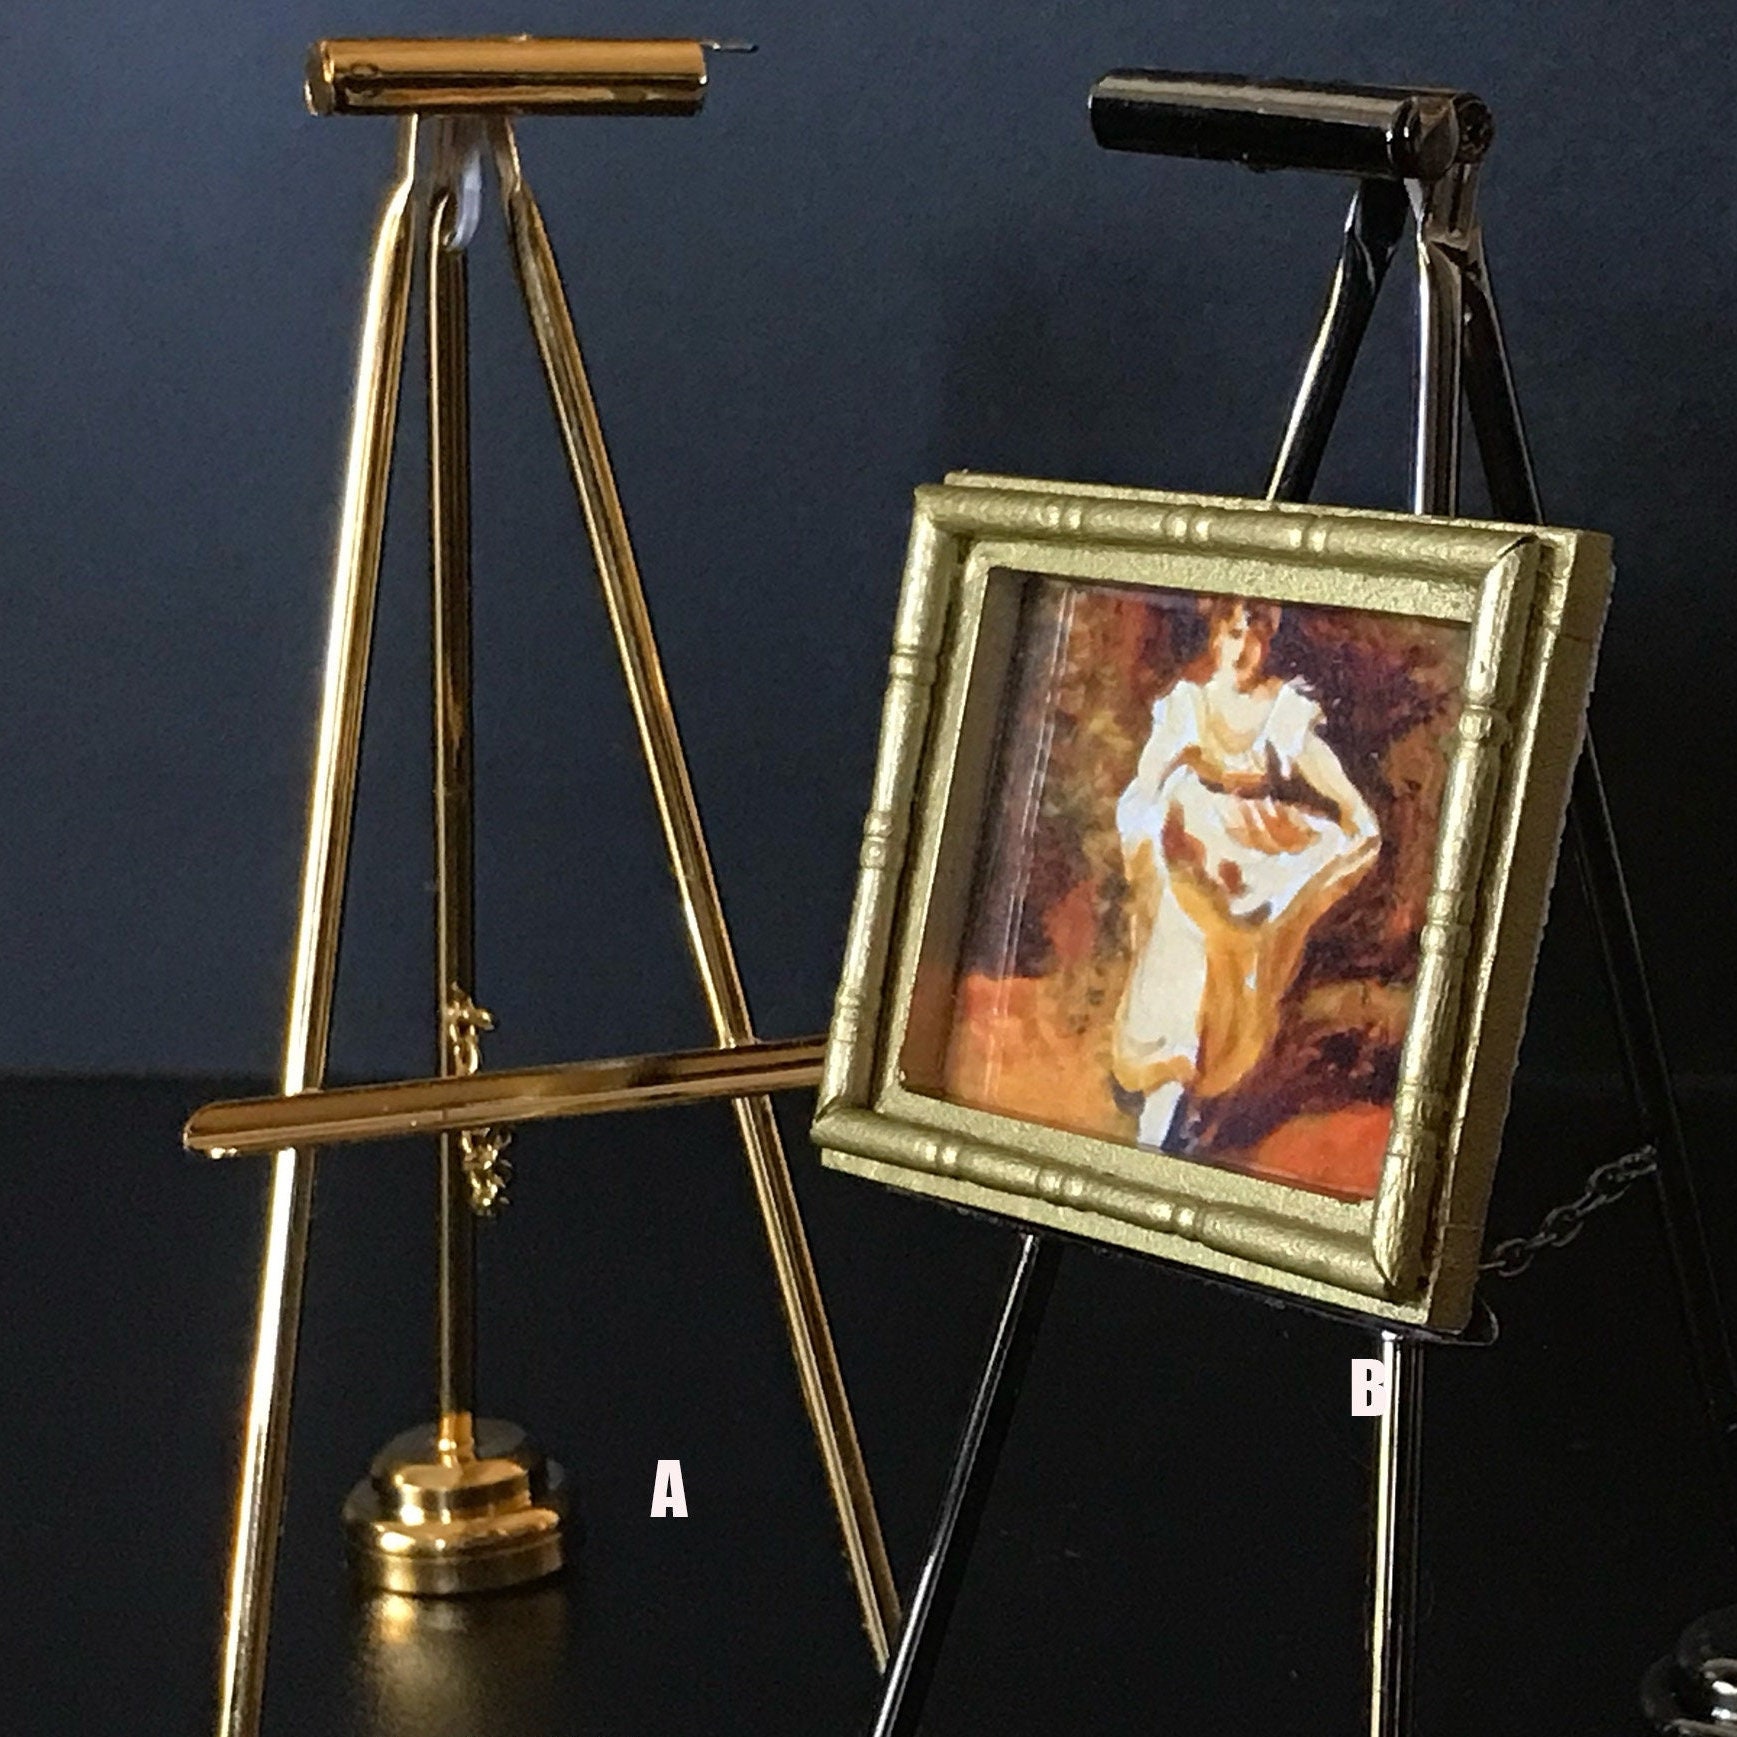 Plate Stands for Display - older Stand + Metal Frame holder stand Picture,  Decorative Plate, Book, Photo Easel,GoldSmall